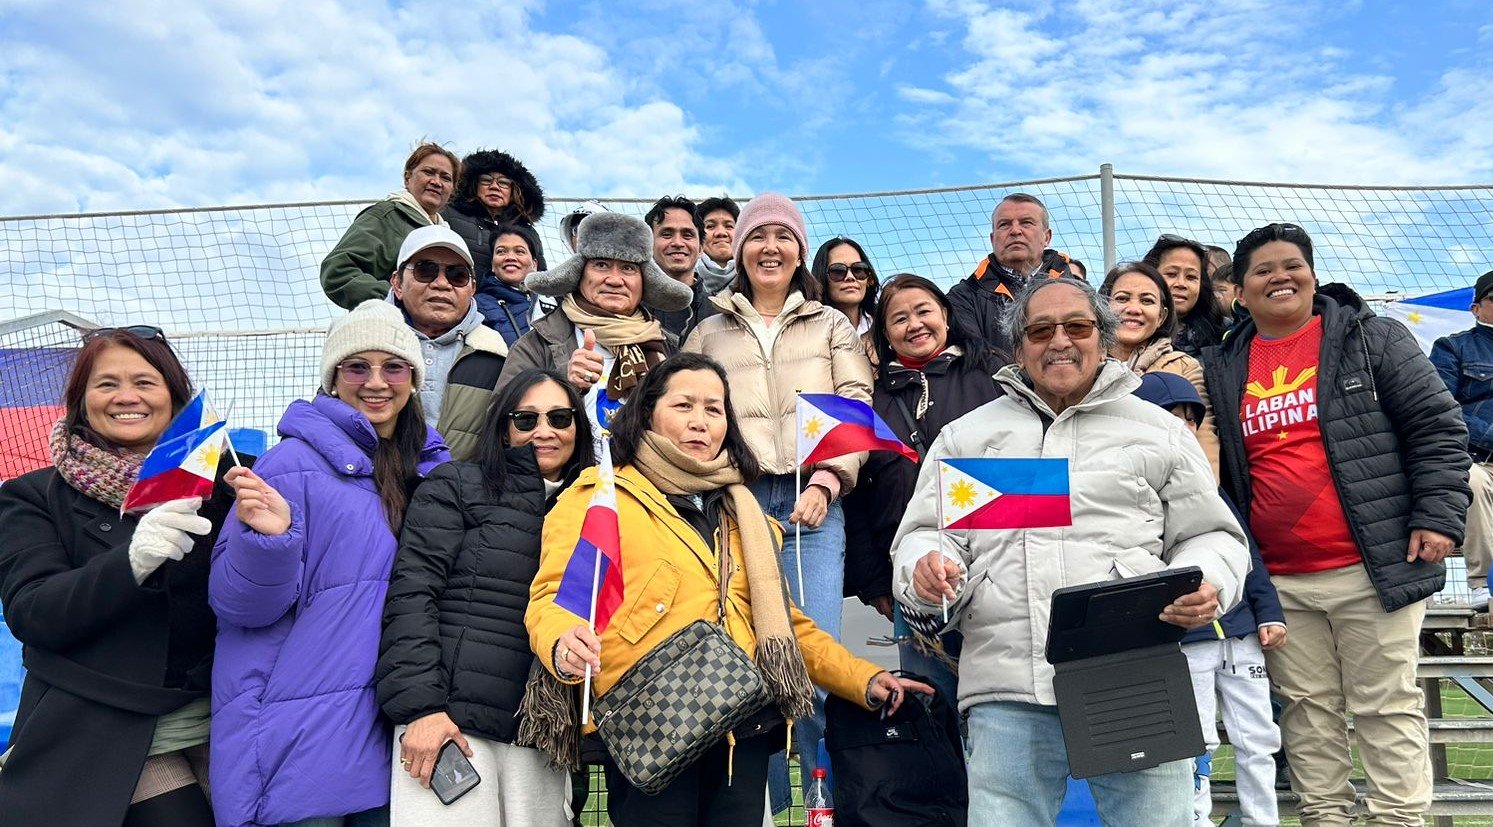 Filipinos in Spain gather to support the Filipinas